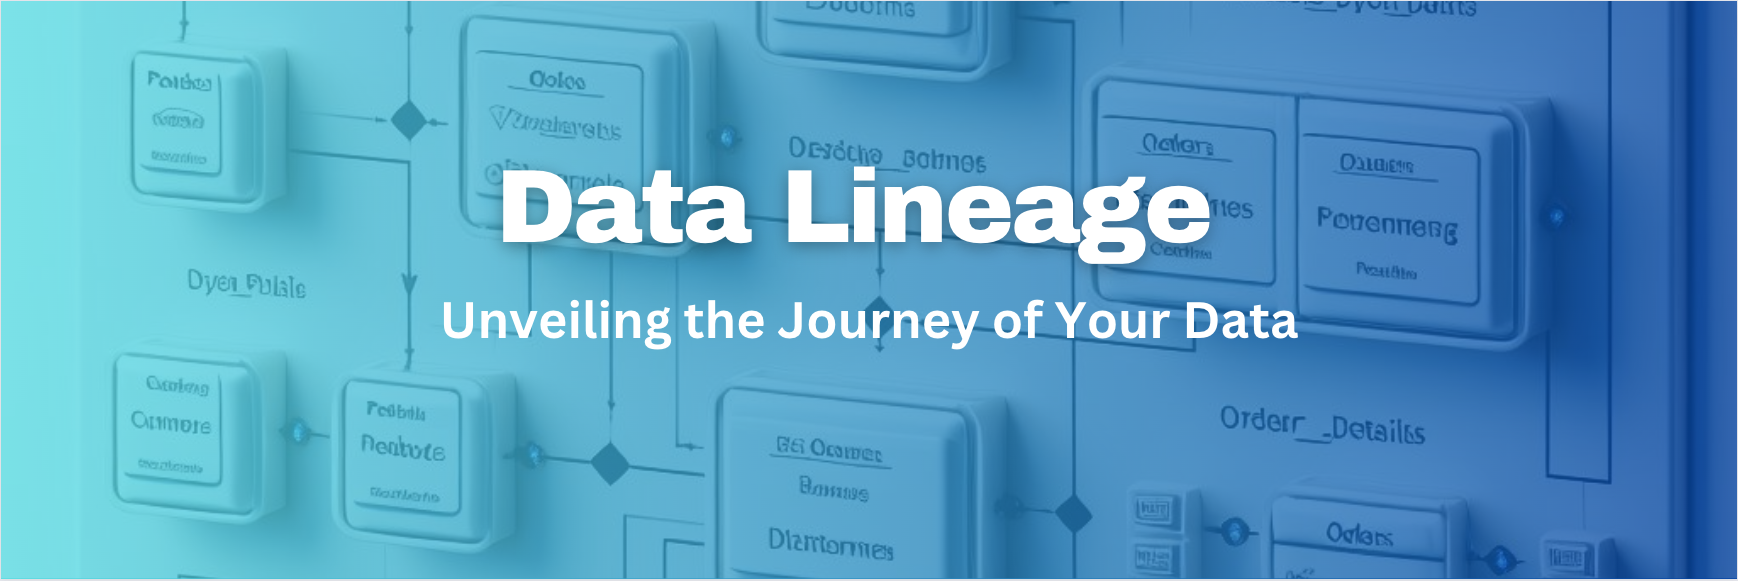 data lineage the journey of your data